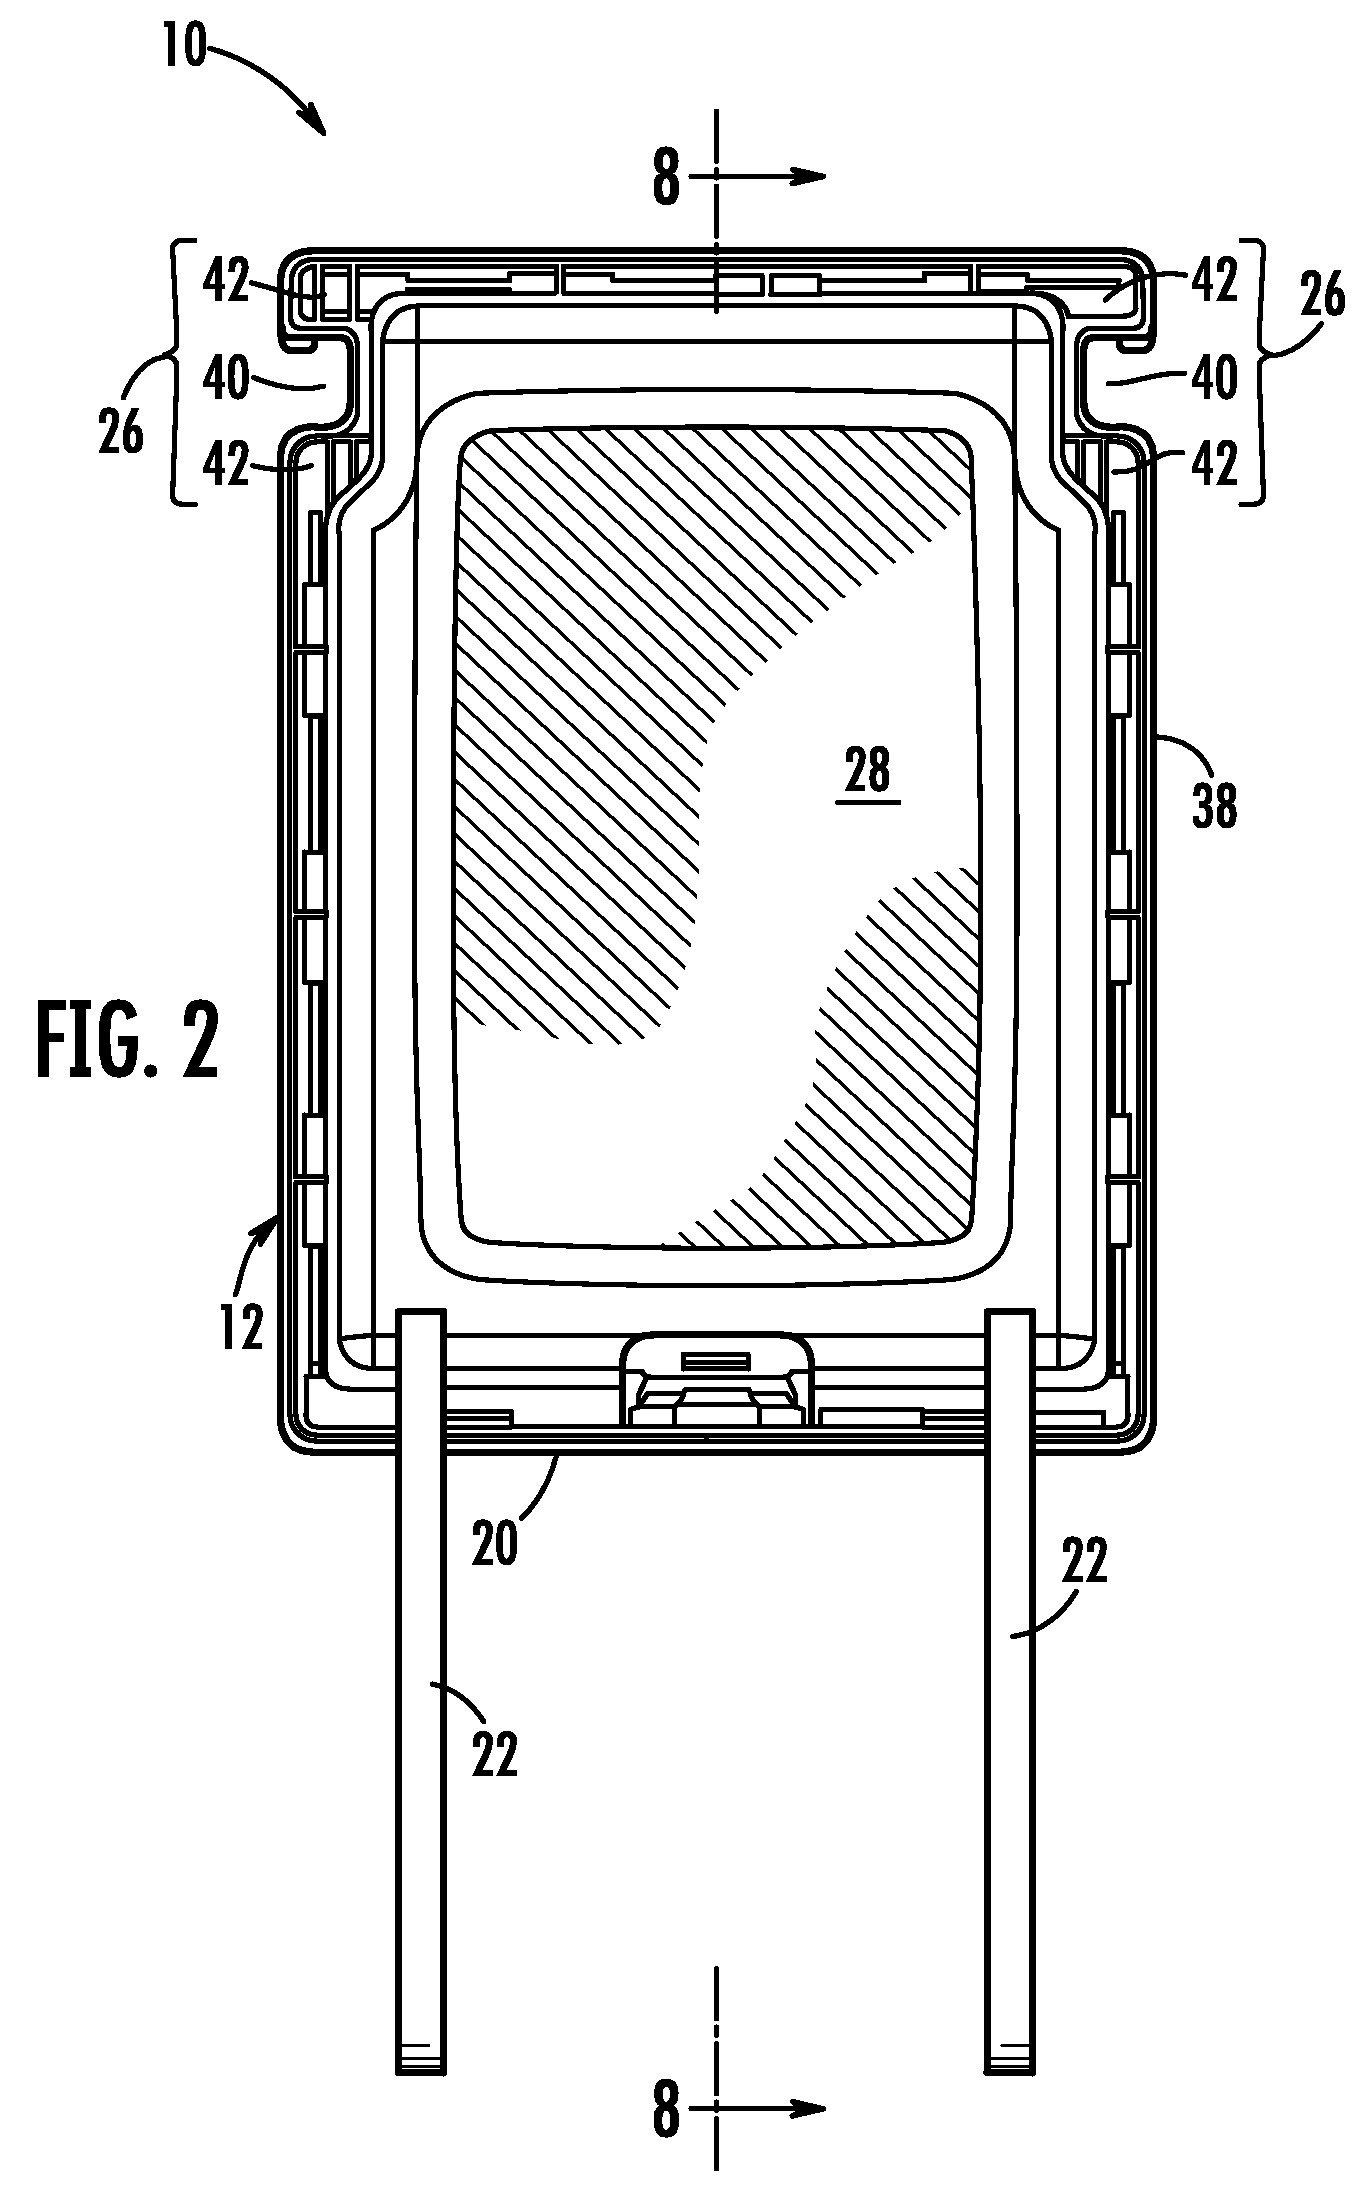 Cartridge assembly for a self-contained emergency eyewash station